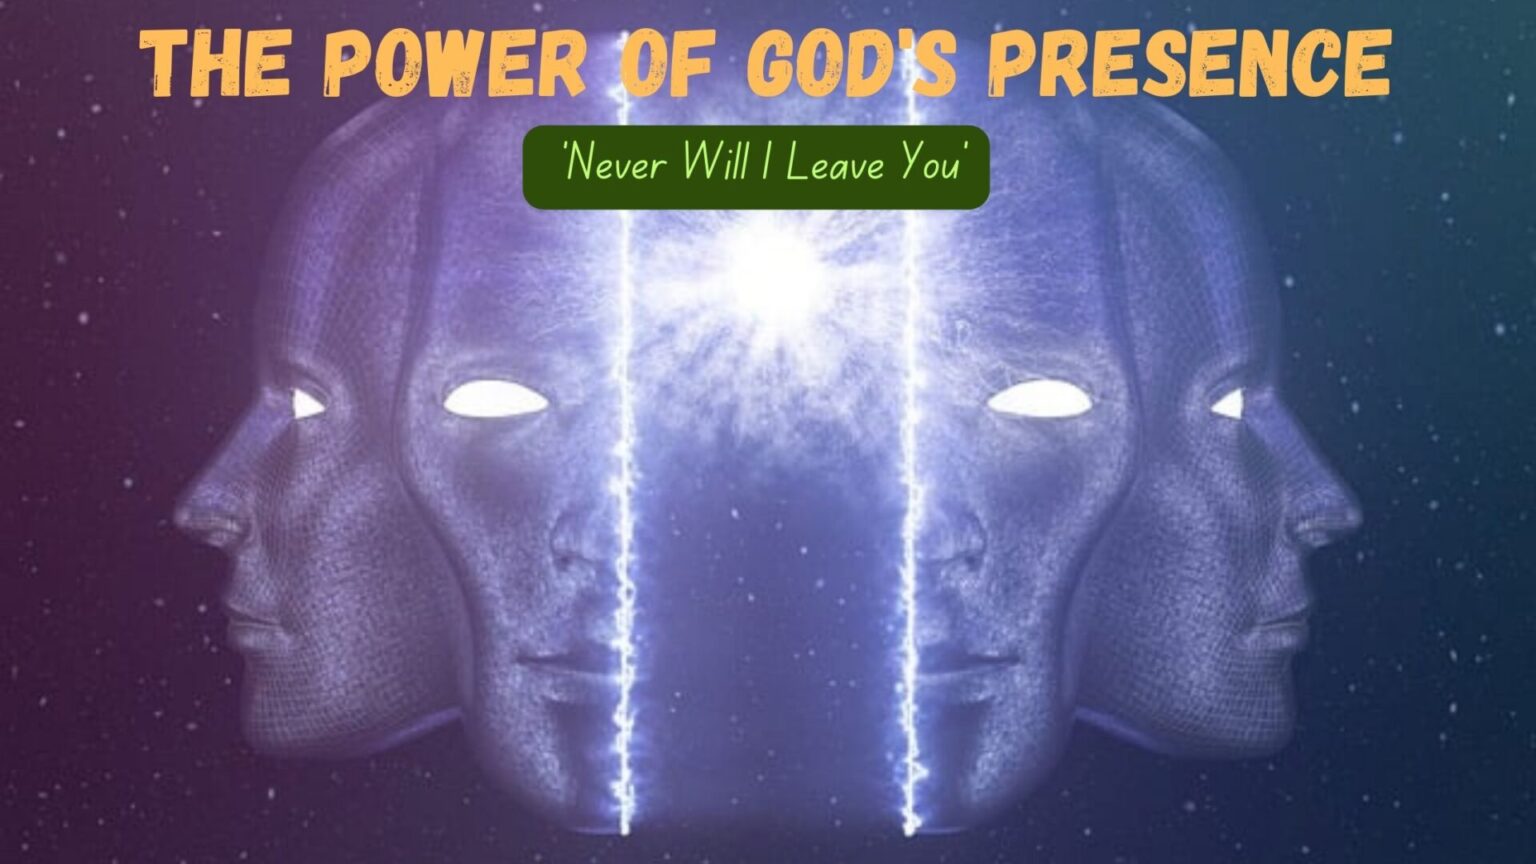 The Power of God's Presence: 'Never Will I Leave You'